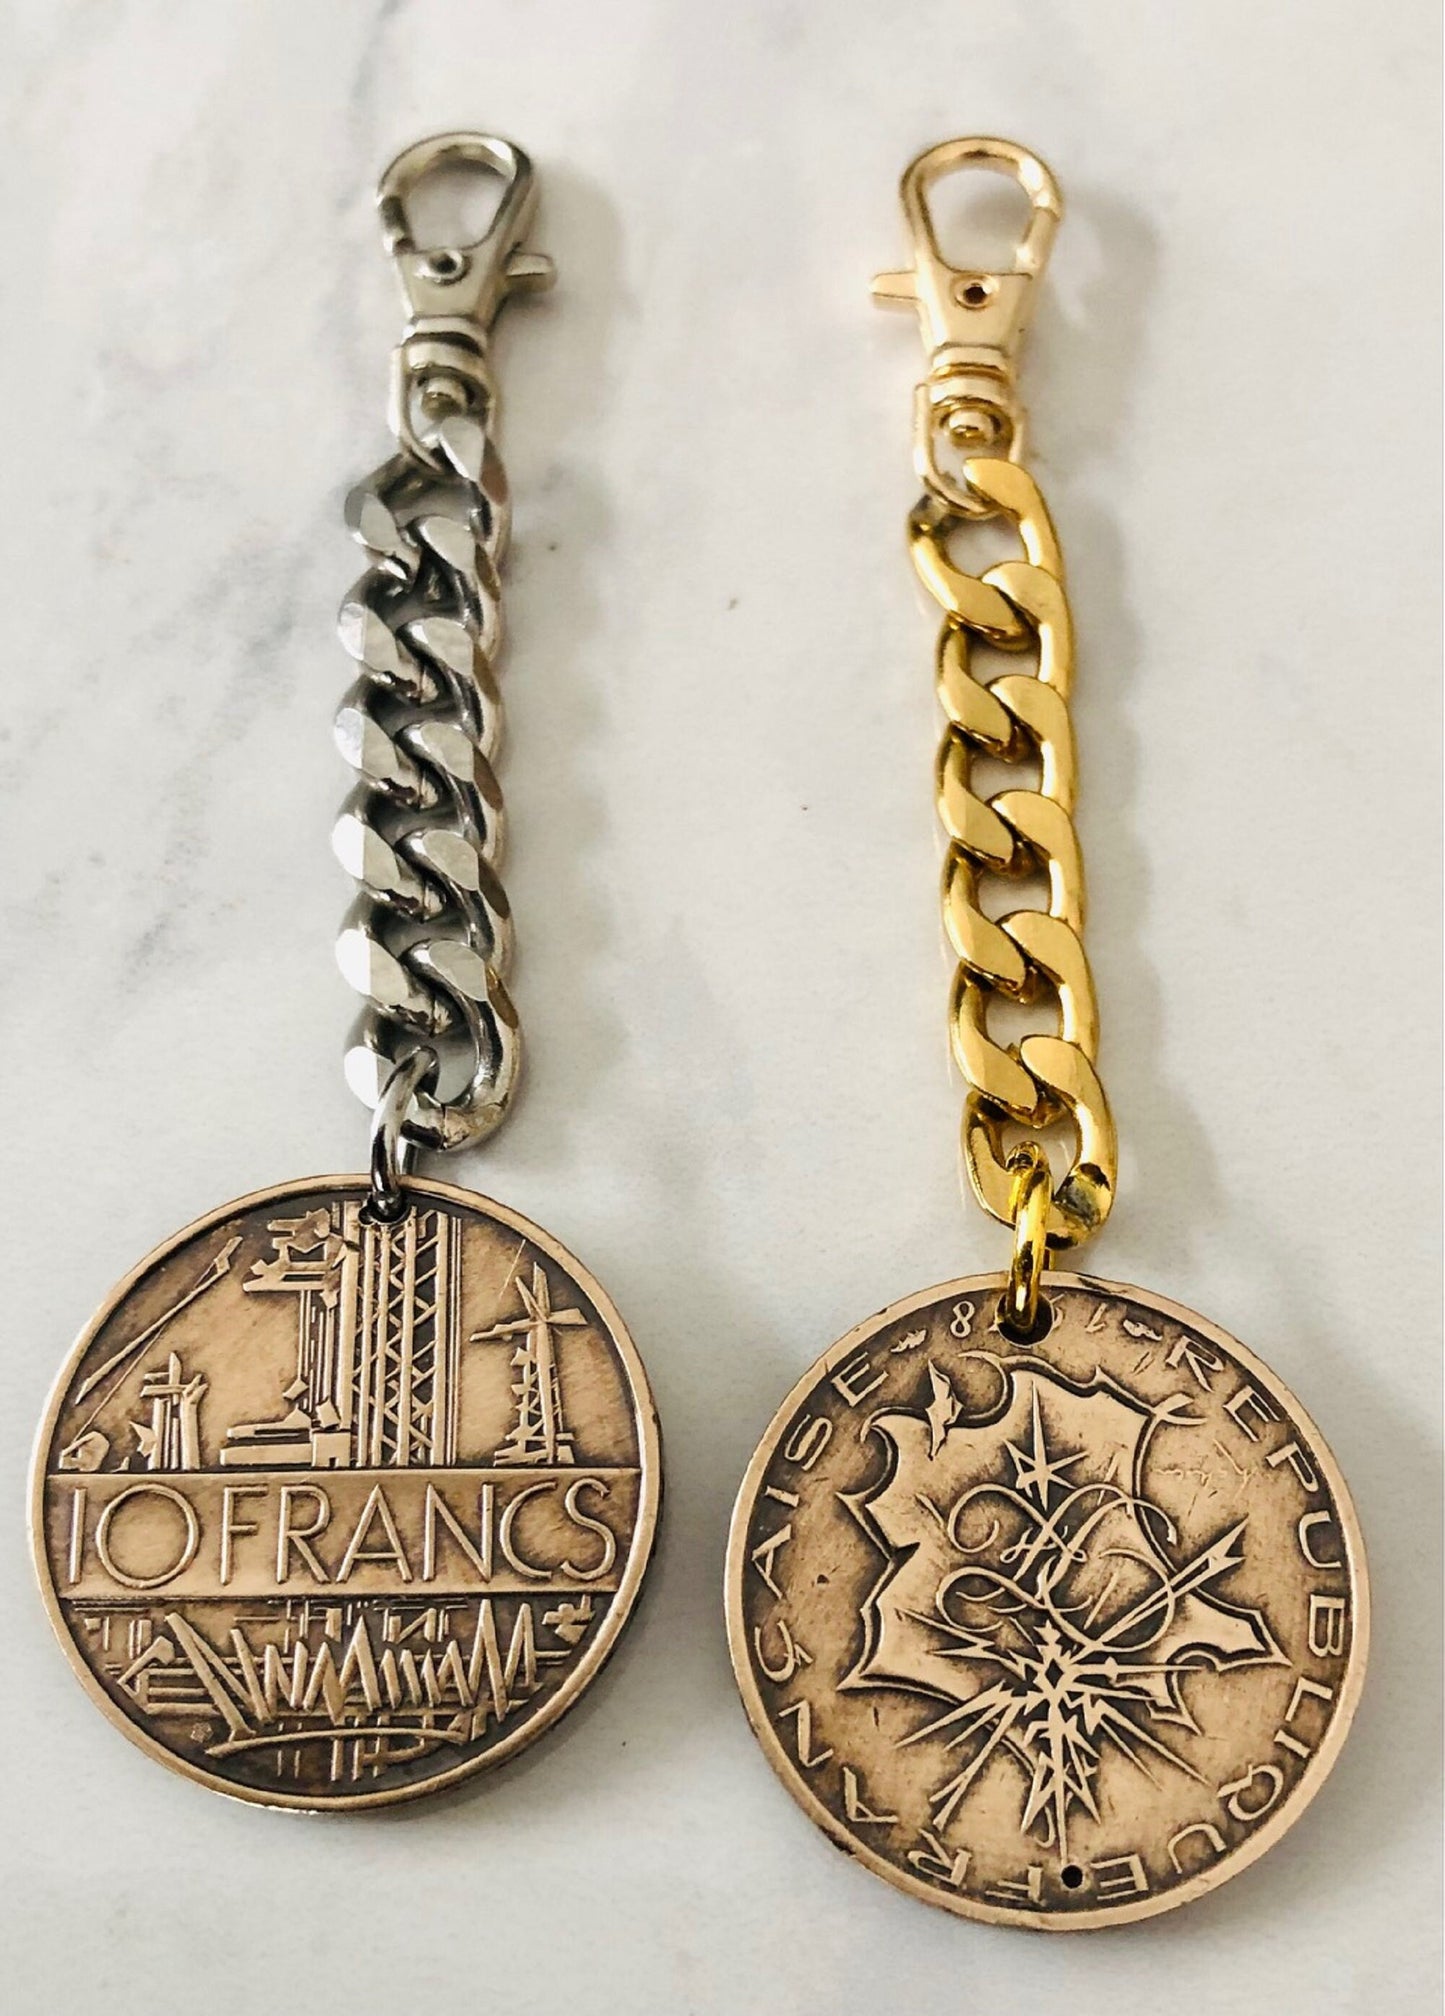 France Coin Zipper Pull French Franc, Centimes, Coin Enthusiast, Jacket, Back Pack, Luggage, Tent, Sleeping Bag, Purse, Clutch